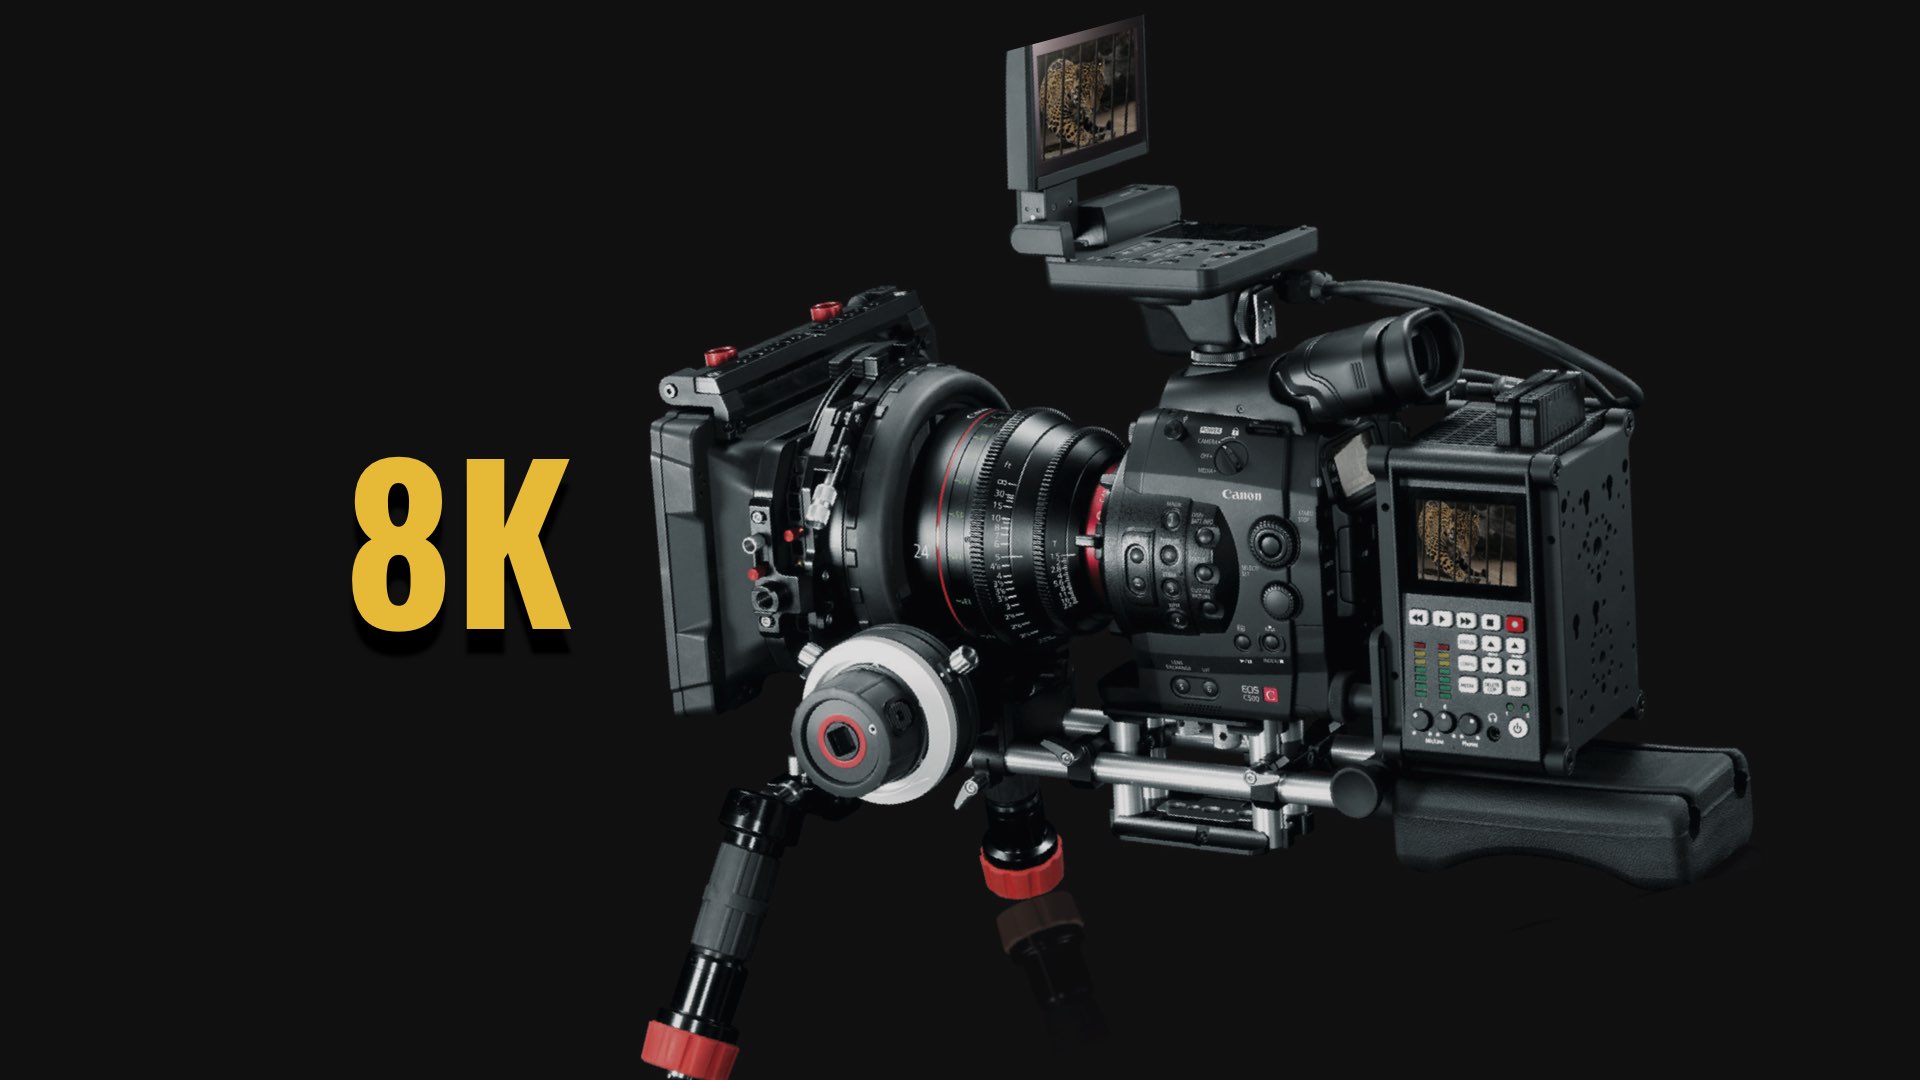 Canon C500 and 8K resolution